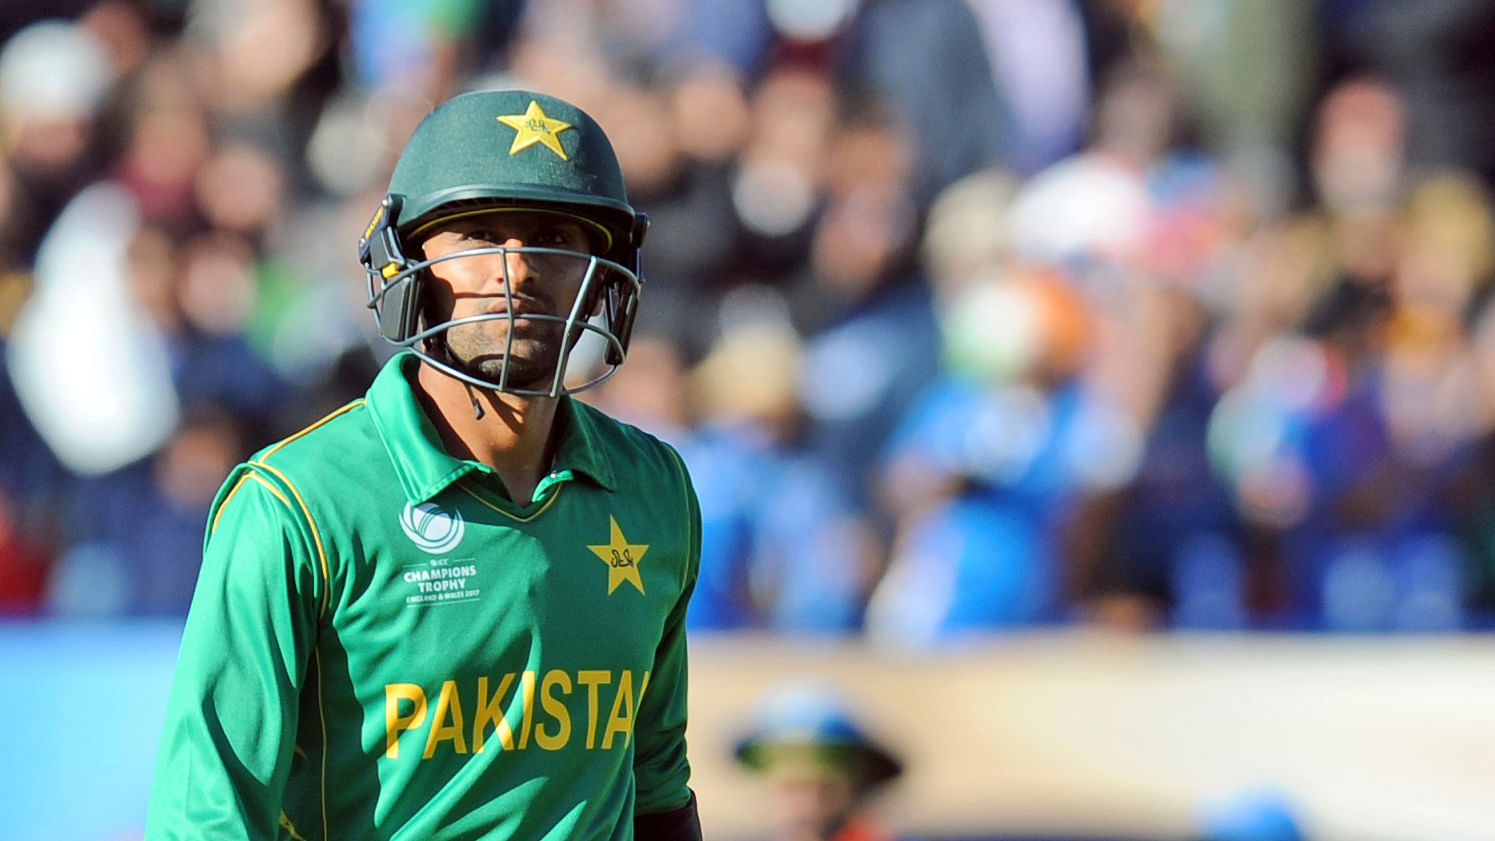 A star in limited-overs cricket, Shoaib Malik’s Test innings hasn’t seen much success even as he ended his ODI career on the sidelines of the World Cup.